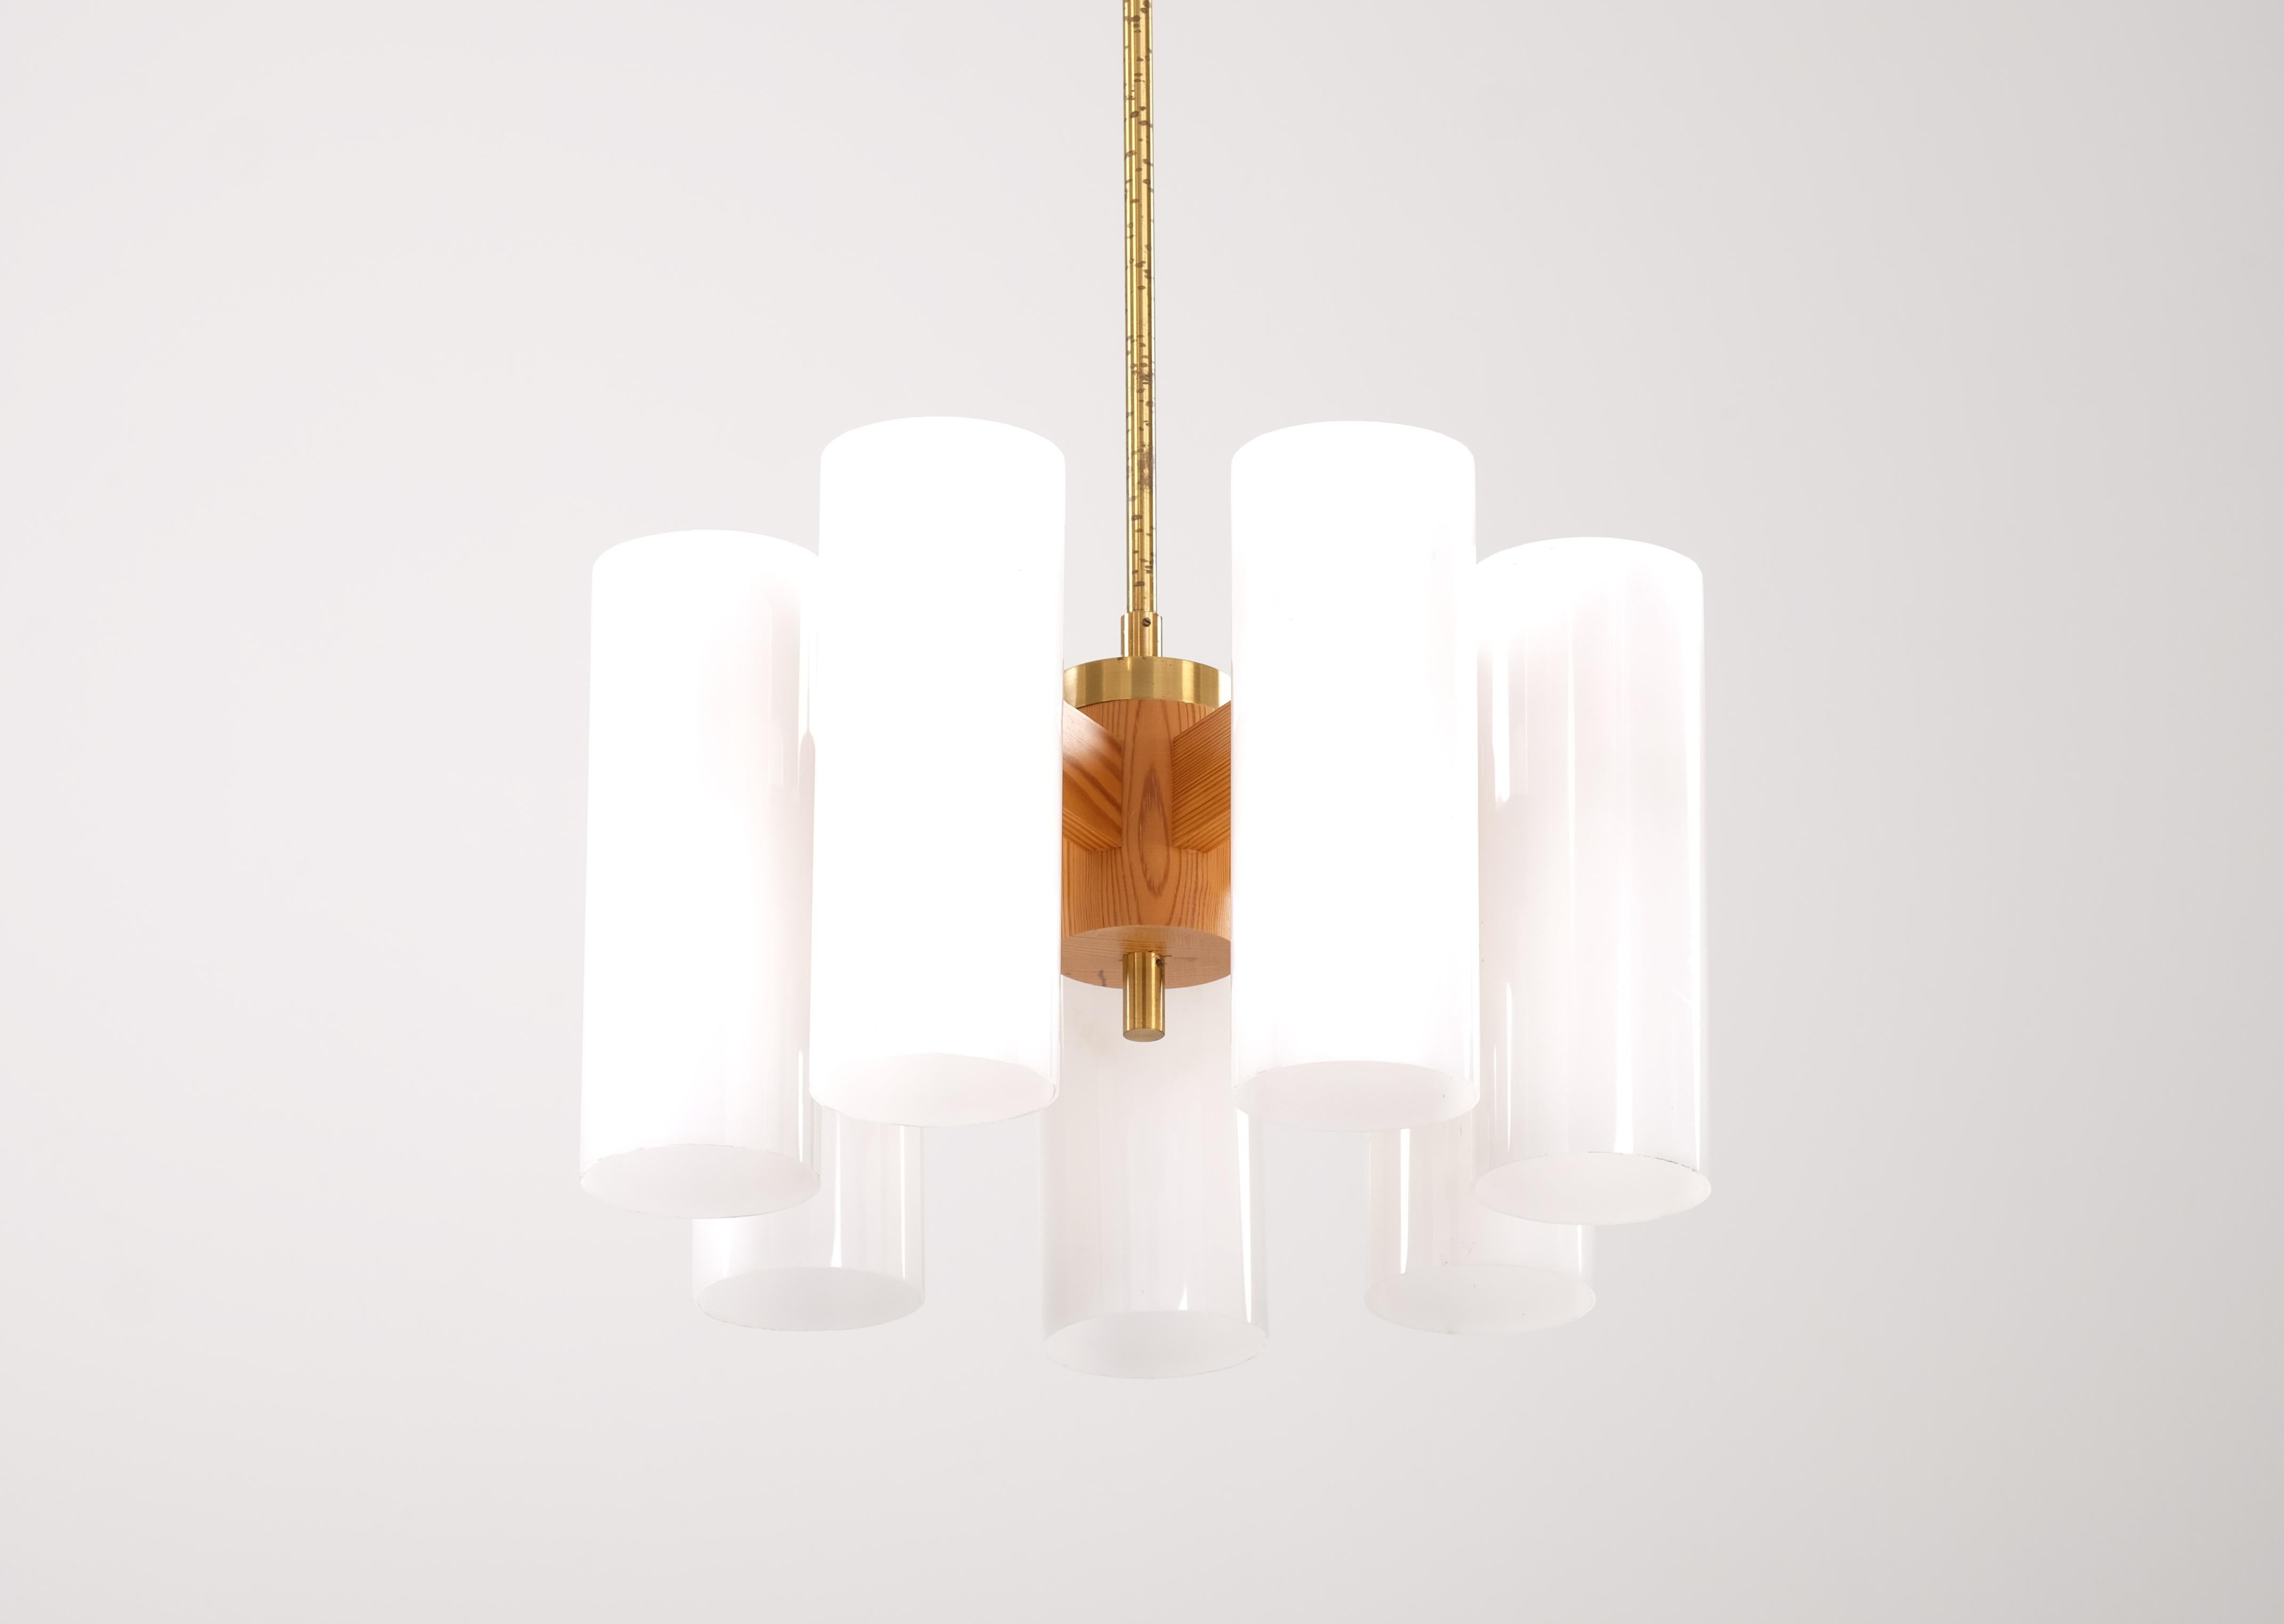 Uno & Östen Kristiansson chandeliers produced by Luxus. Solid pine, brass and acrylic shades. 
Height is adjustable after your preferences.
Please note: Listed price is for one (1) lamp.